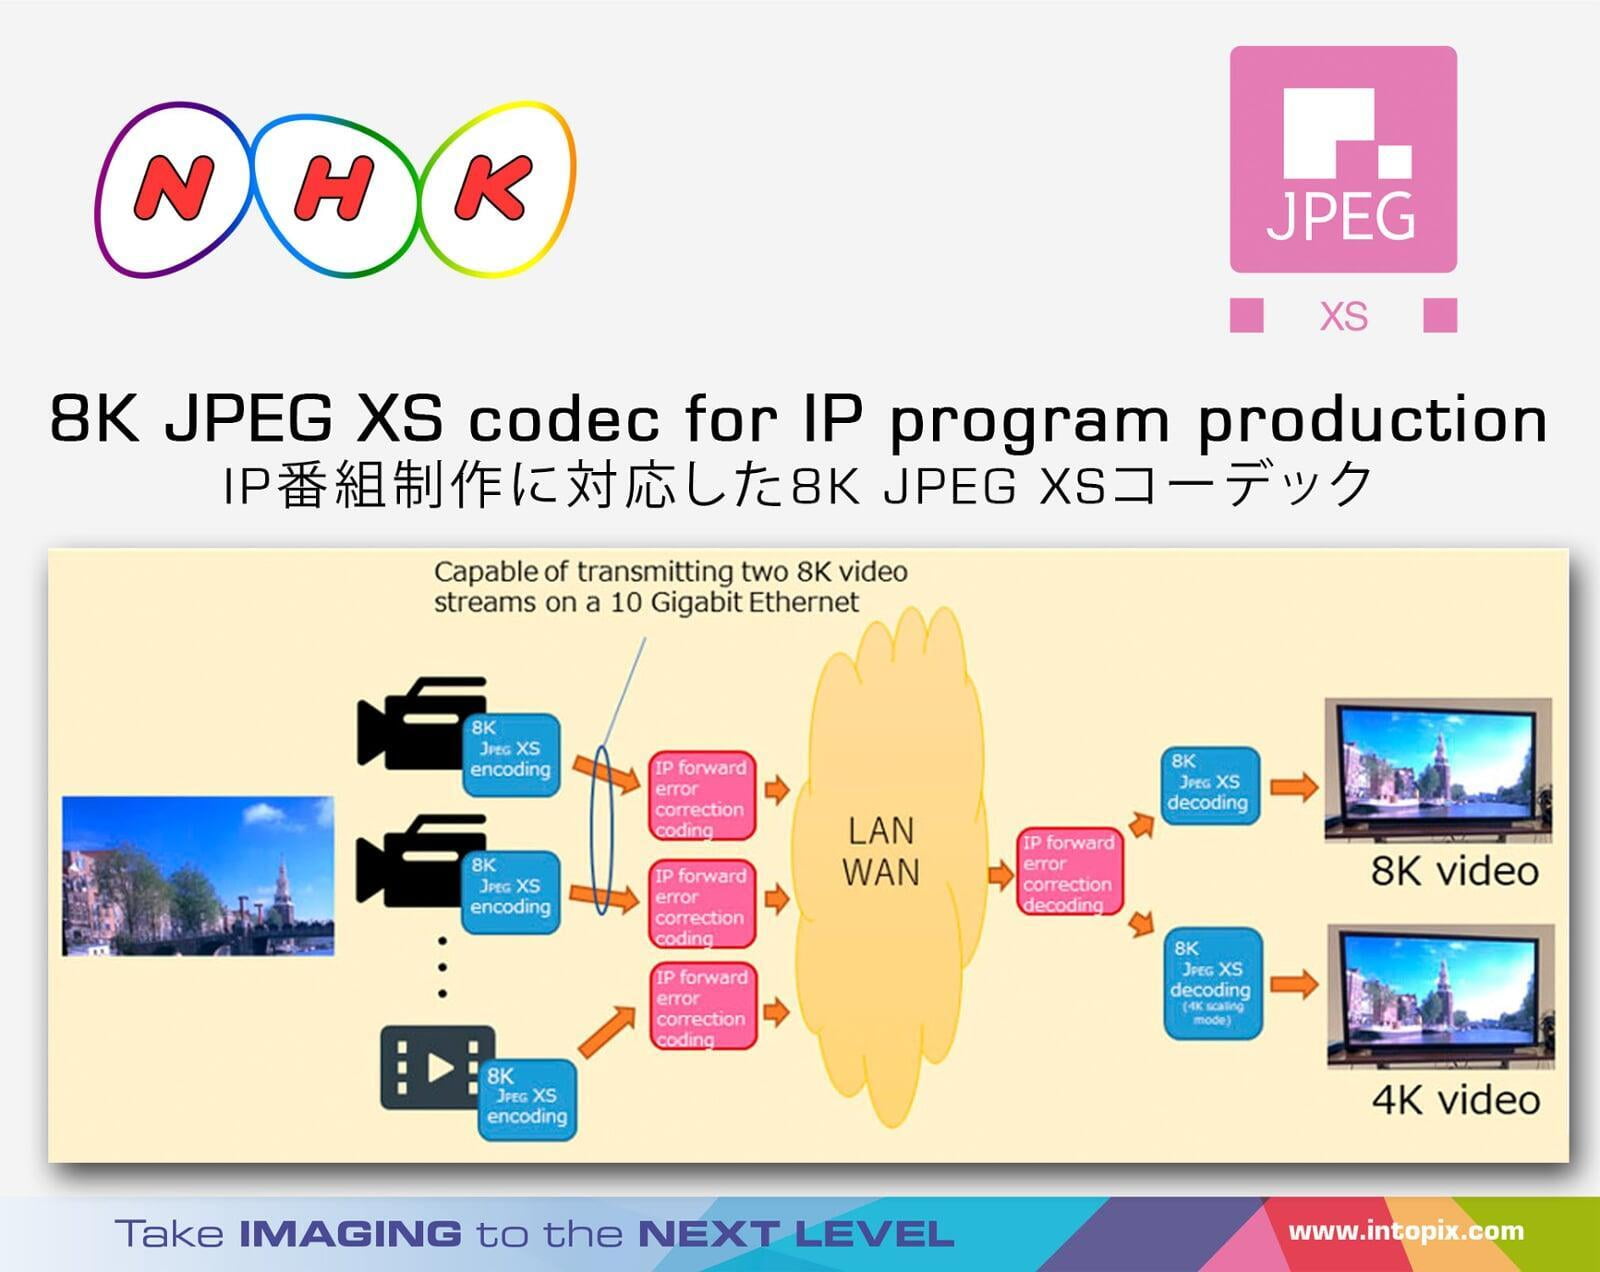 Introducing 8K JPEG XS Codec for Live Production using Village Island Codec